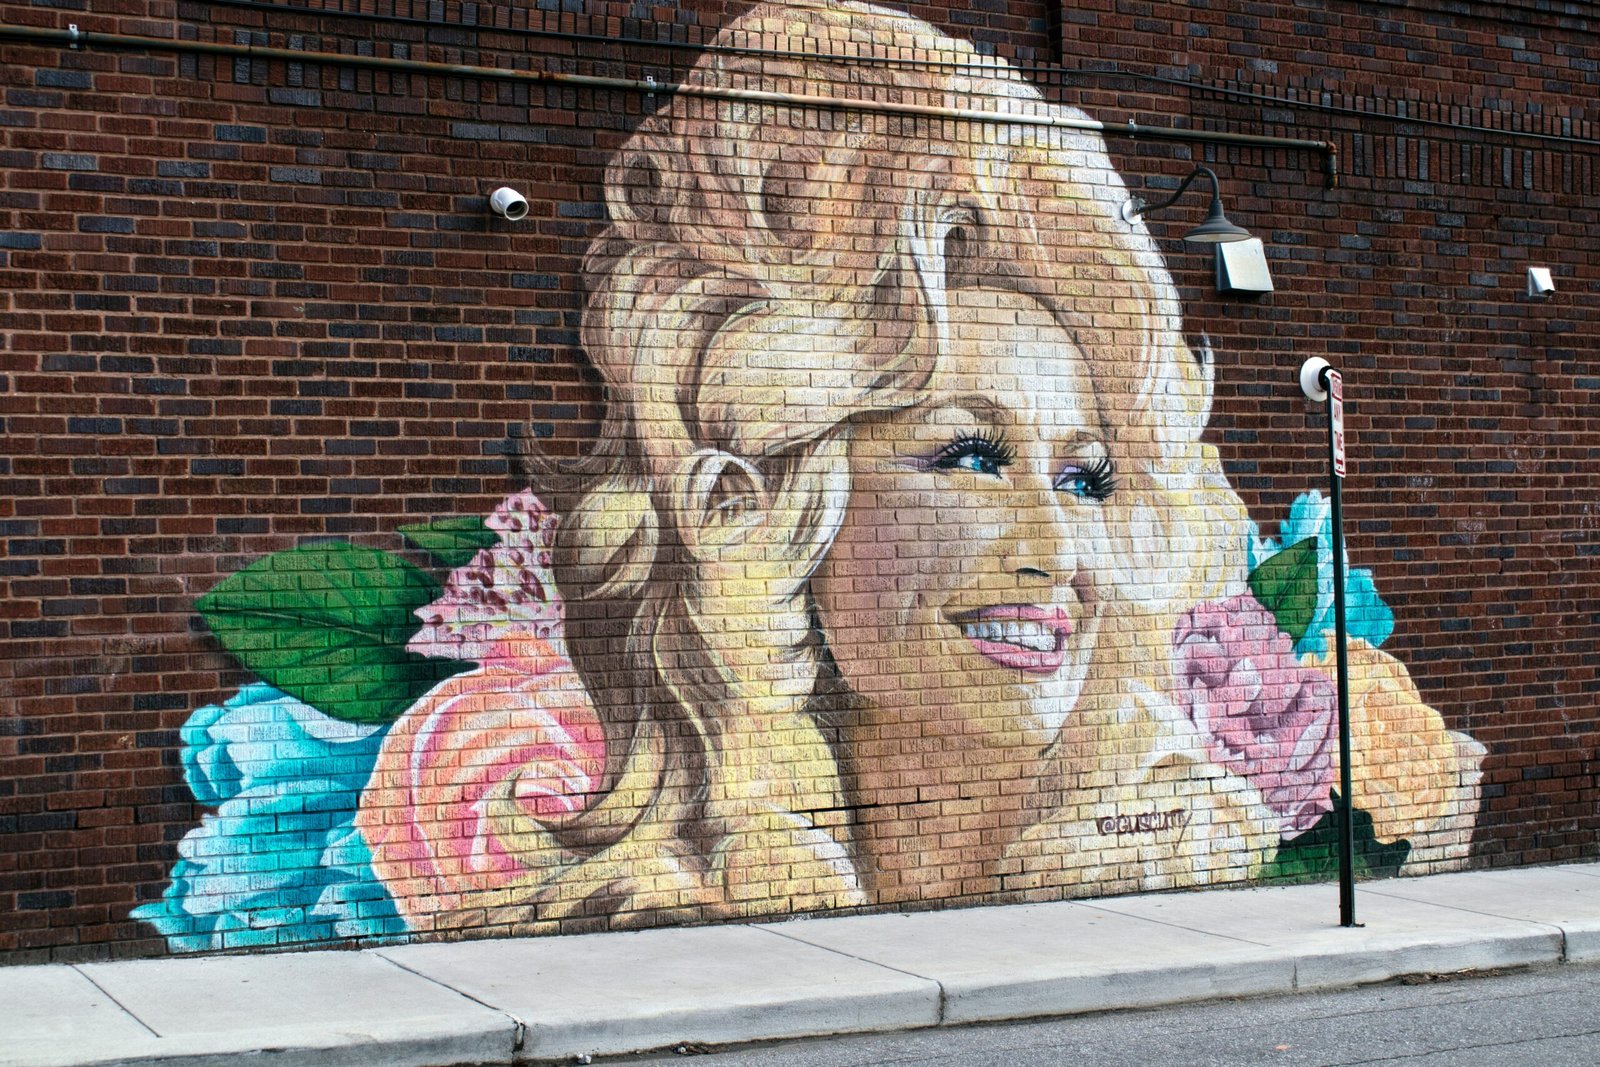 Dolly Parton’s Remarkable Journey: From Humble Beginnings to a $650 Million Net Worth